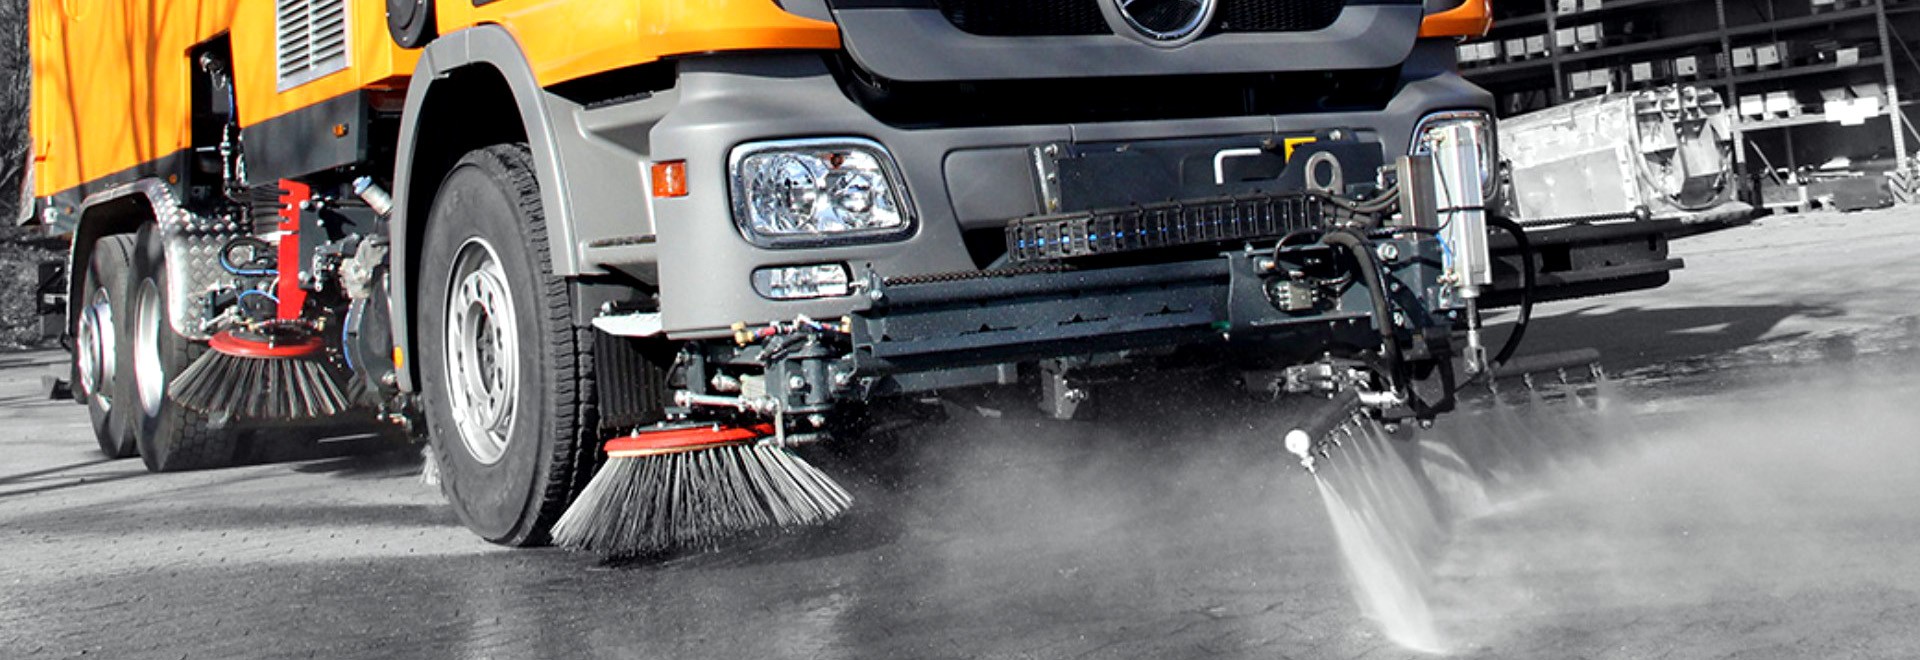 Road Sweepers - Cleaning